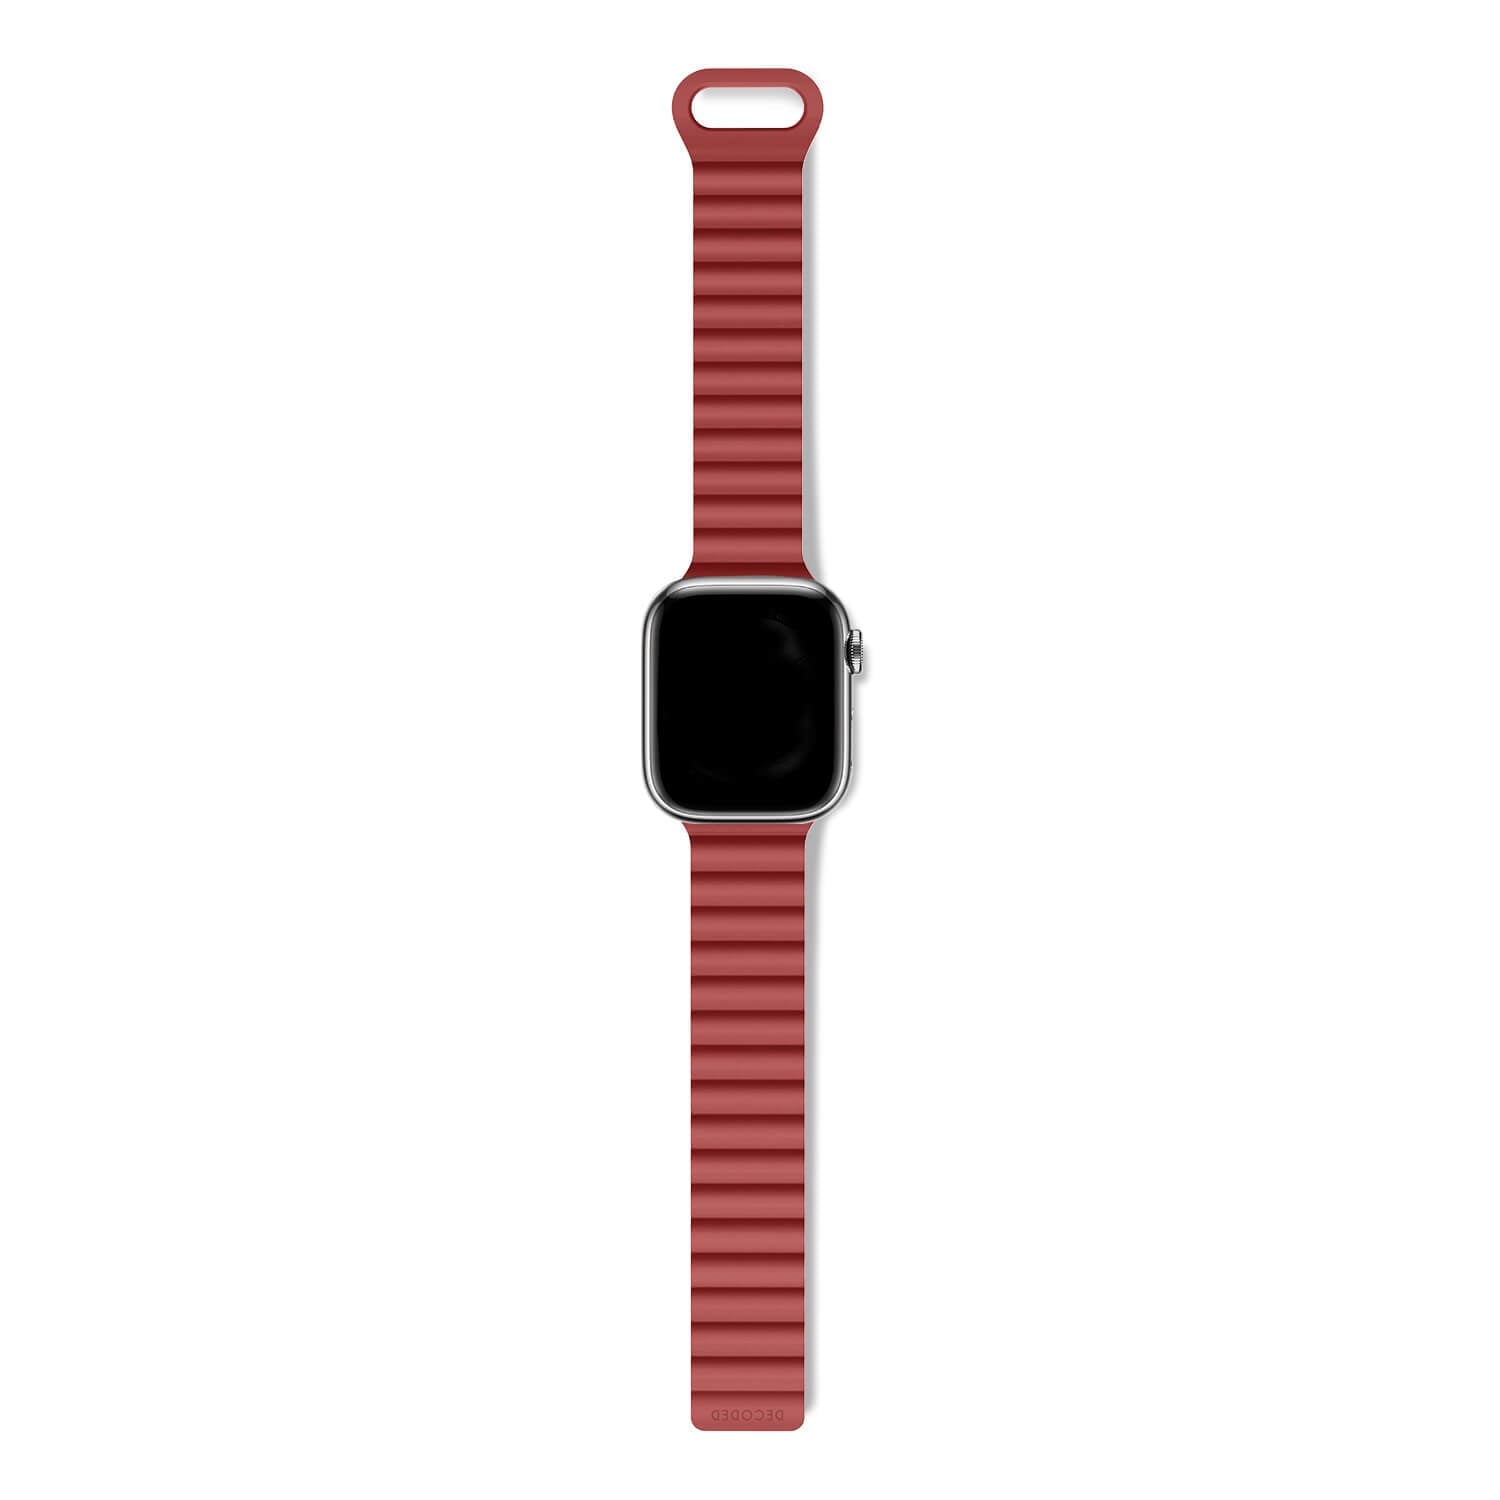 Silicone Traction Loop Strap Apple Watch 44mm Astro Dust